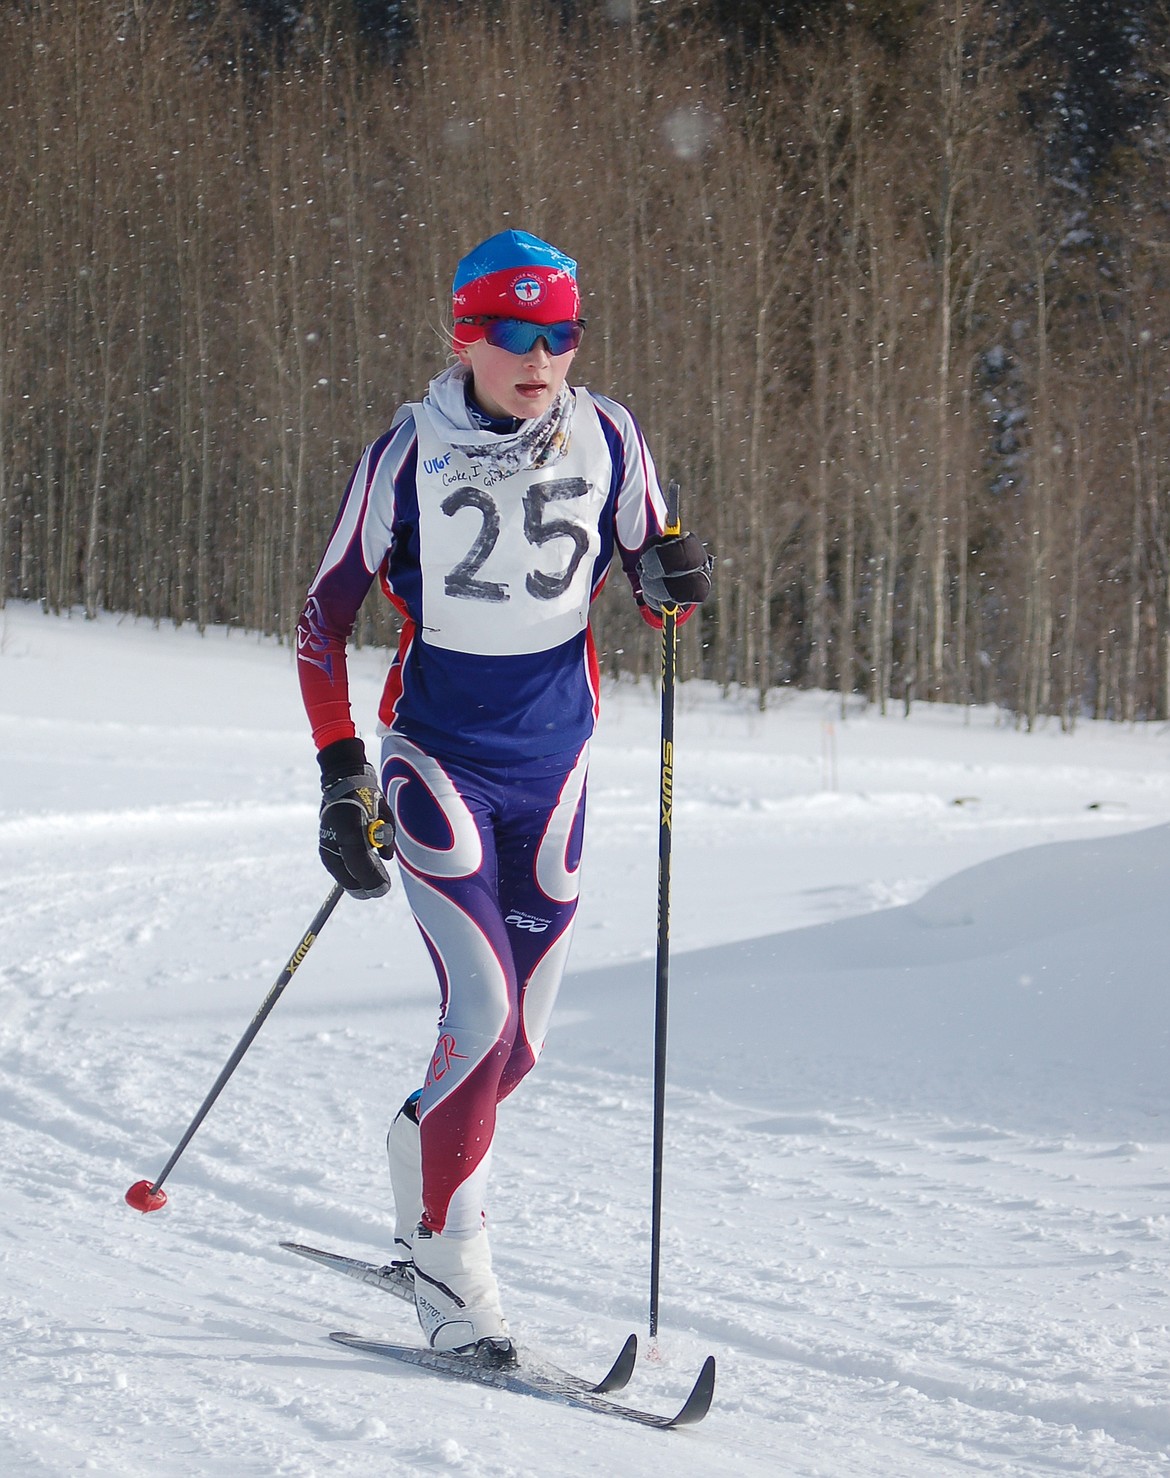 Glacier Nordic Ski Team's Isabelle Cooke finished 15th in the U16 female 5km race in Jackson, Wyoming, earlier this month. (Photo courtesy Rebecca Konieczny)